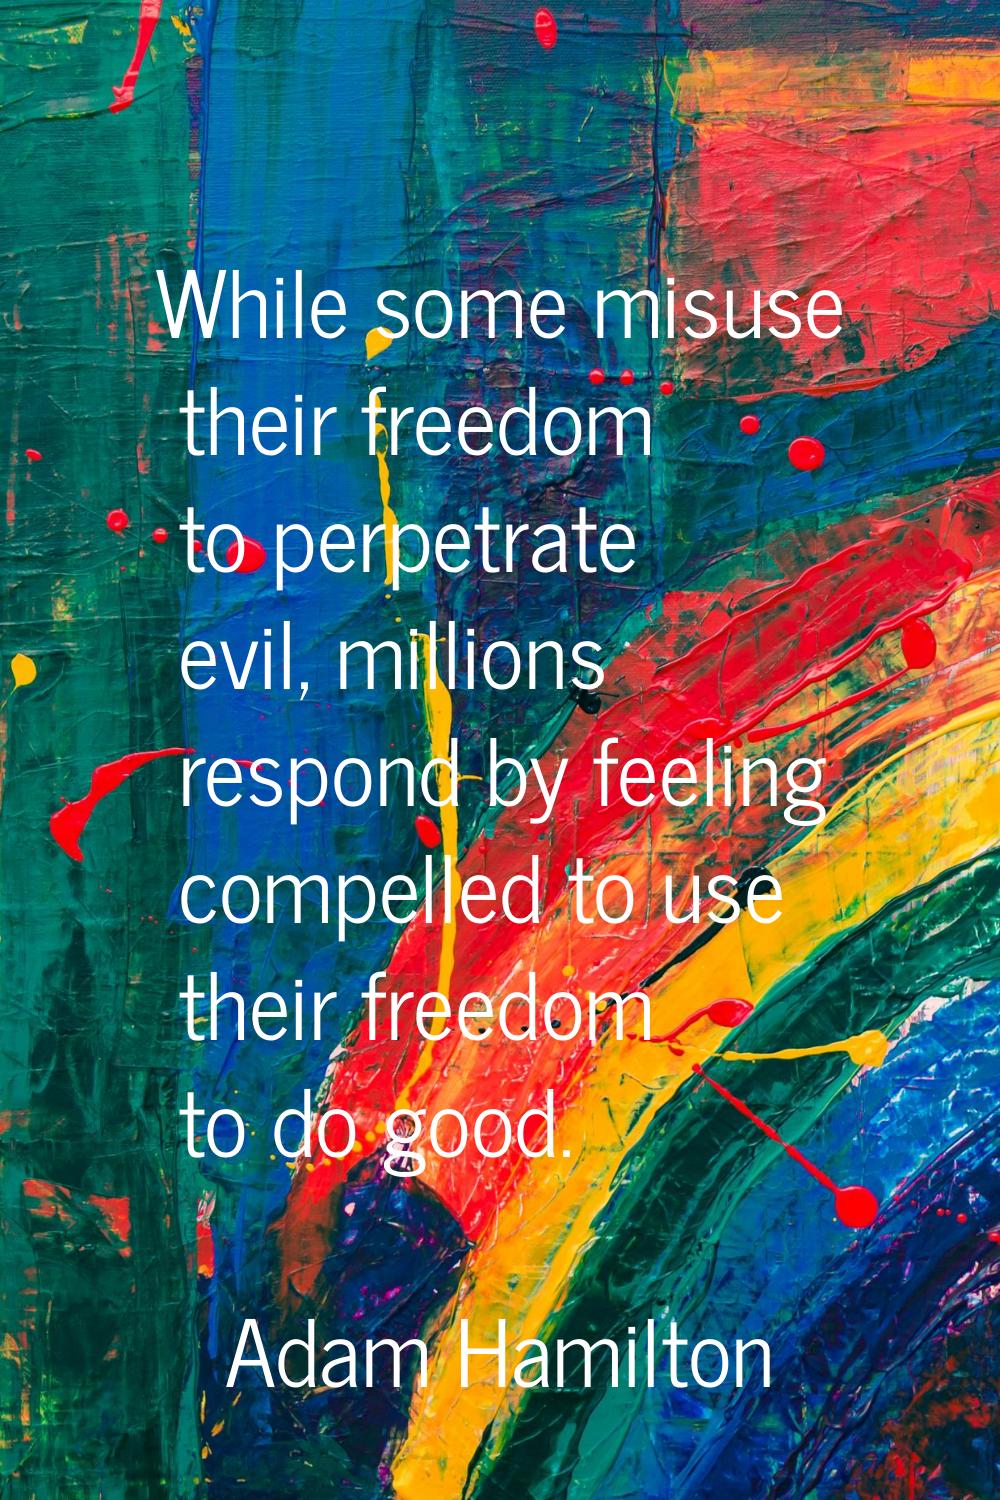 While some misuse their freedom to perpetrate evil, millions respond by feeling compelled to use th